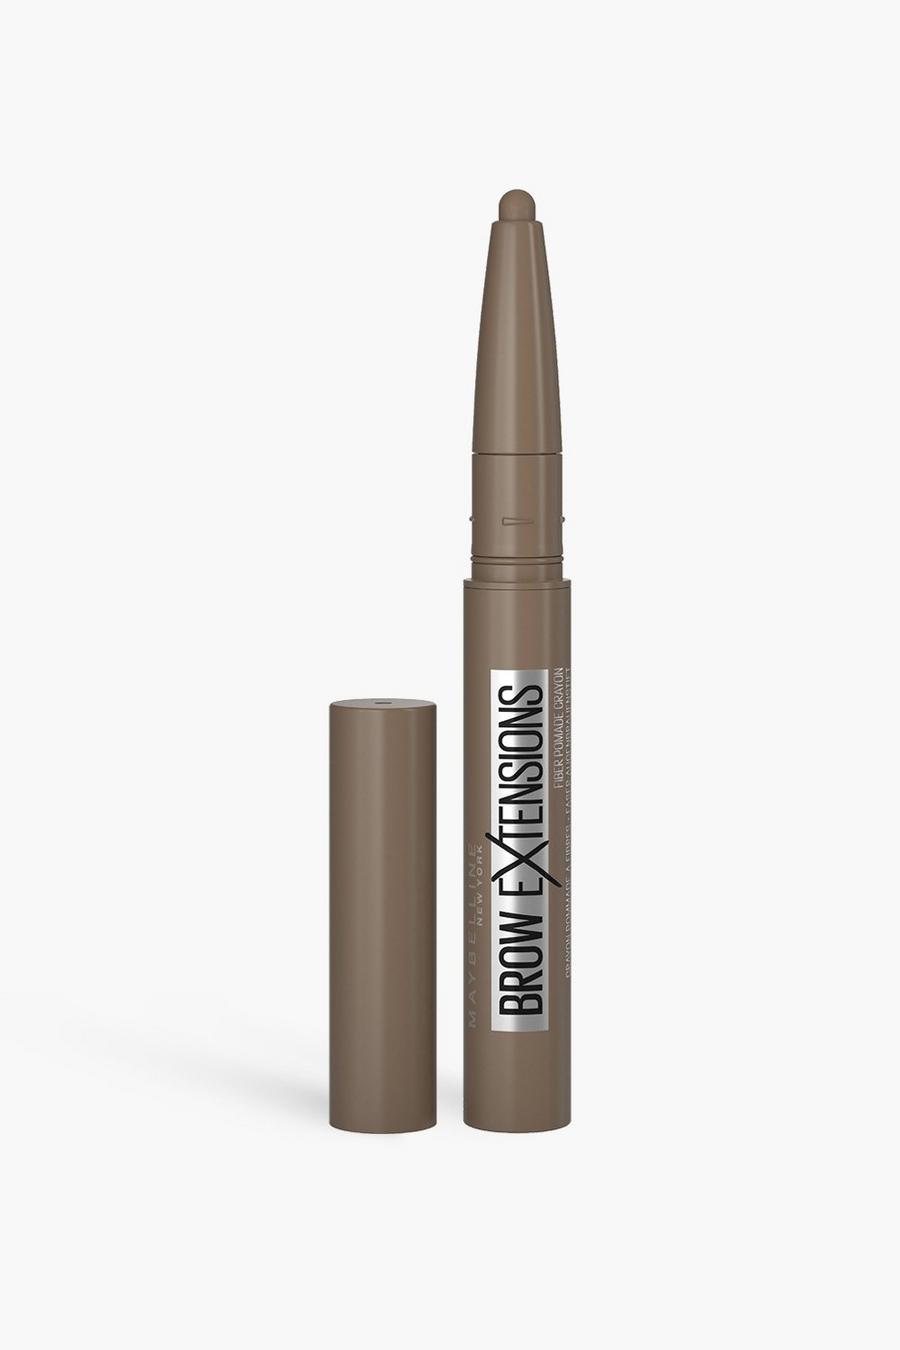 Multi Maybelline Brow Extensions Eyebrow Pomade Crayon - 02 Soft Brown